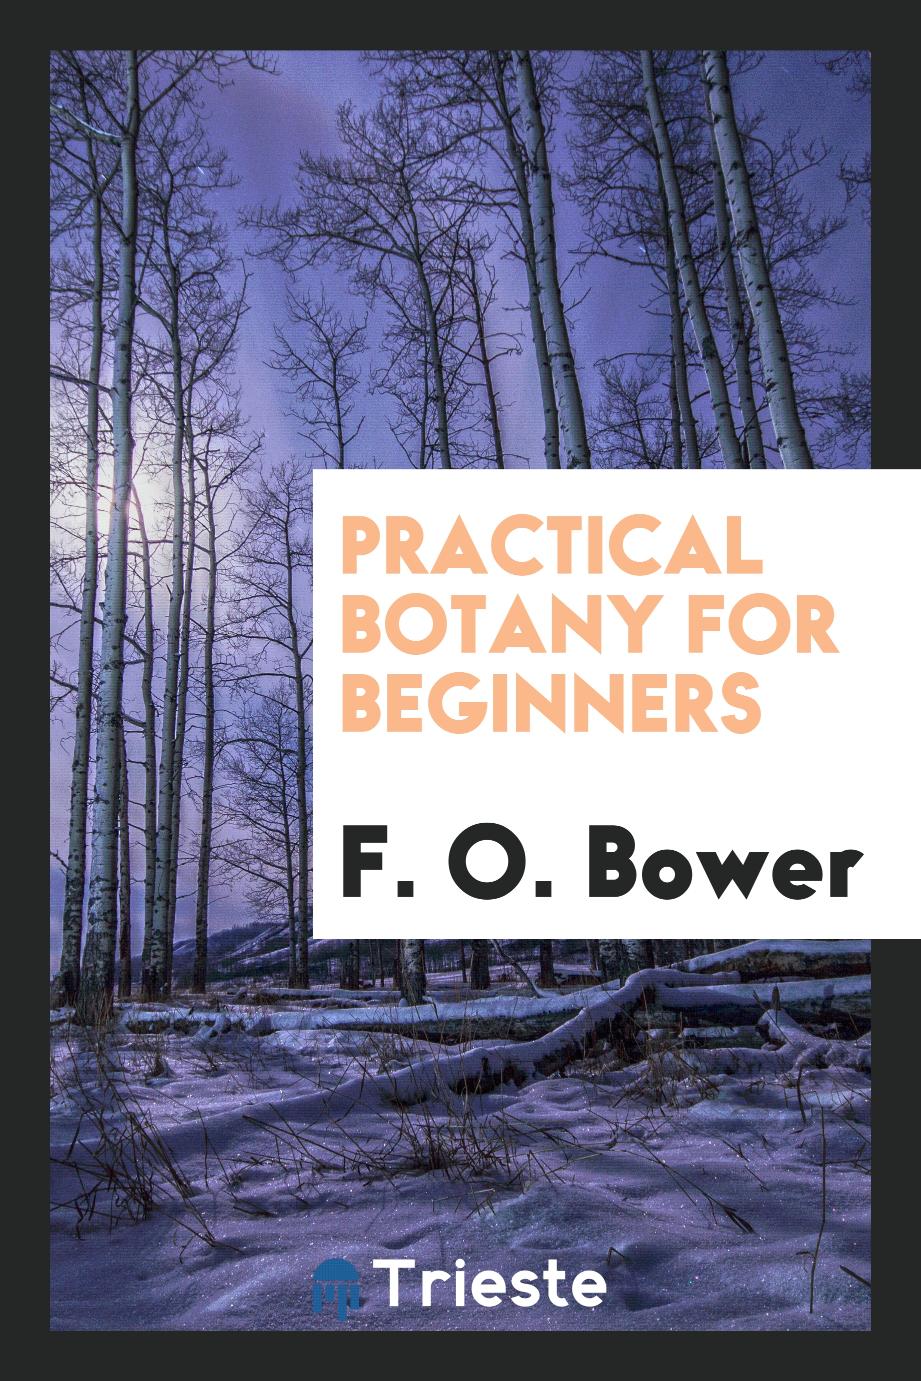 Practical botany for beginners